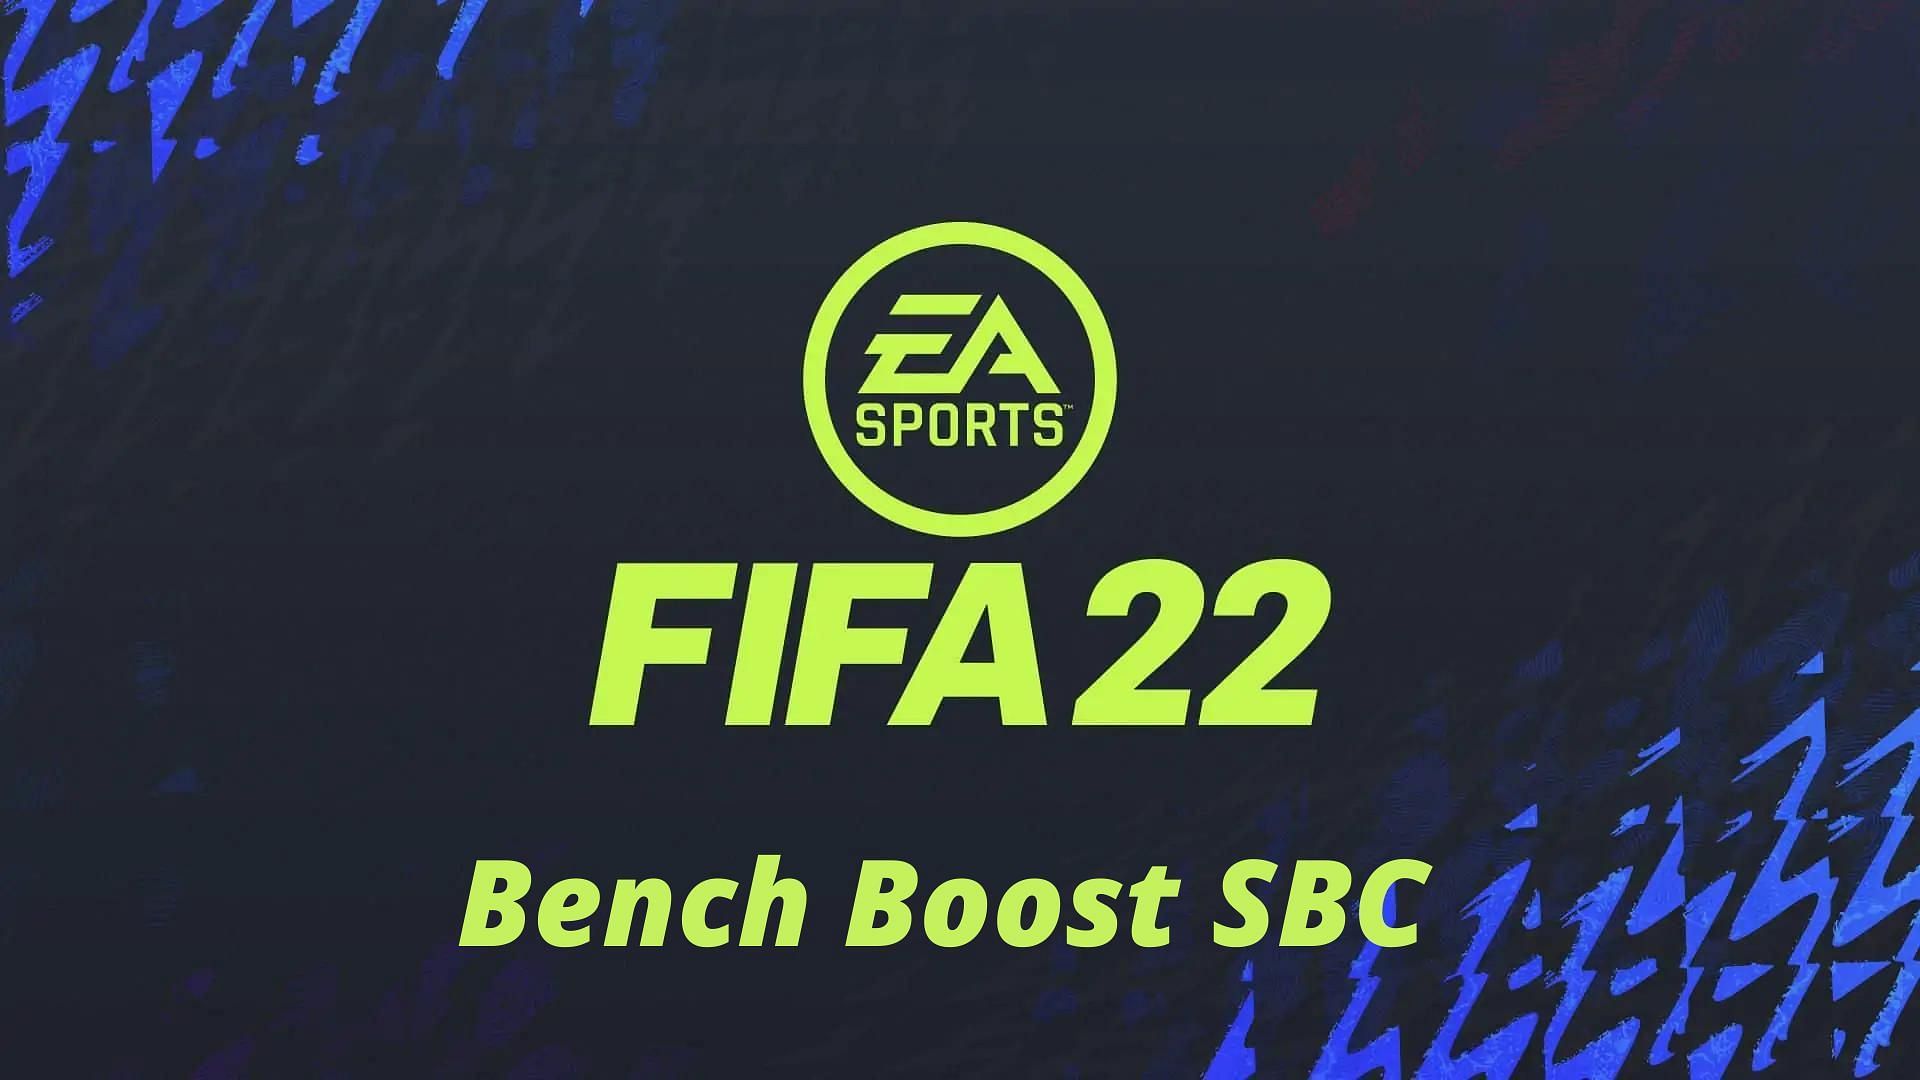 Bench Boost SBC is now live in FIFA 22 Ultimate Team (Image via Sportskeeda)